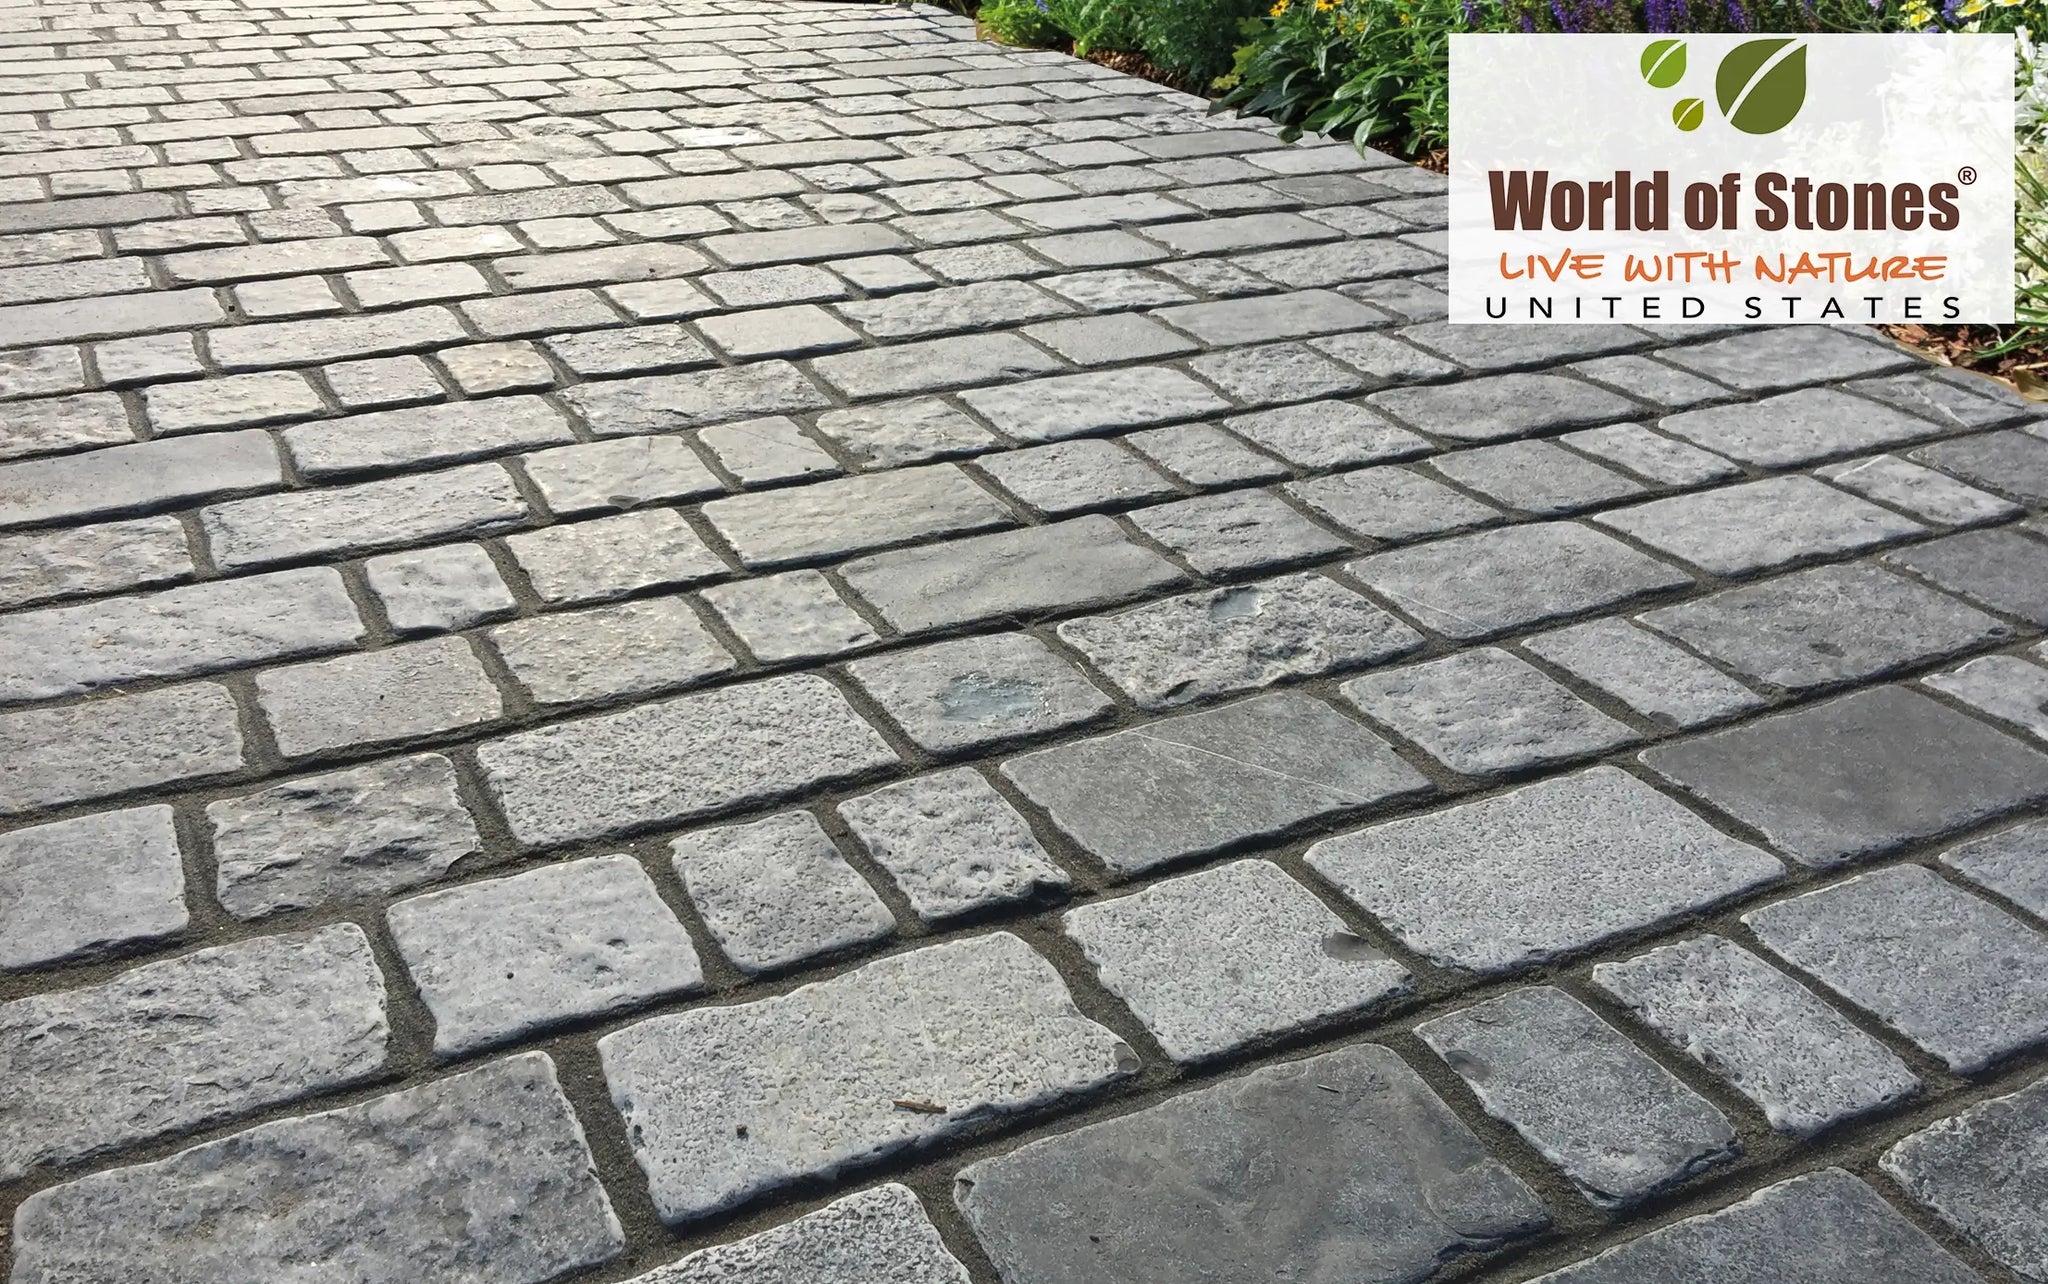 Cobblestone Pavers – 10 Benefits to Use in Driveway